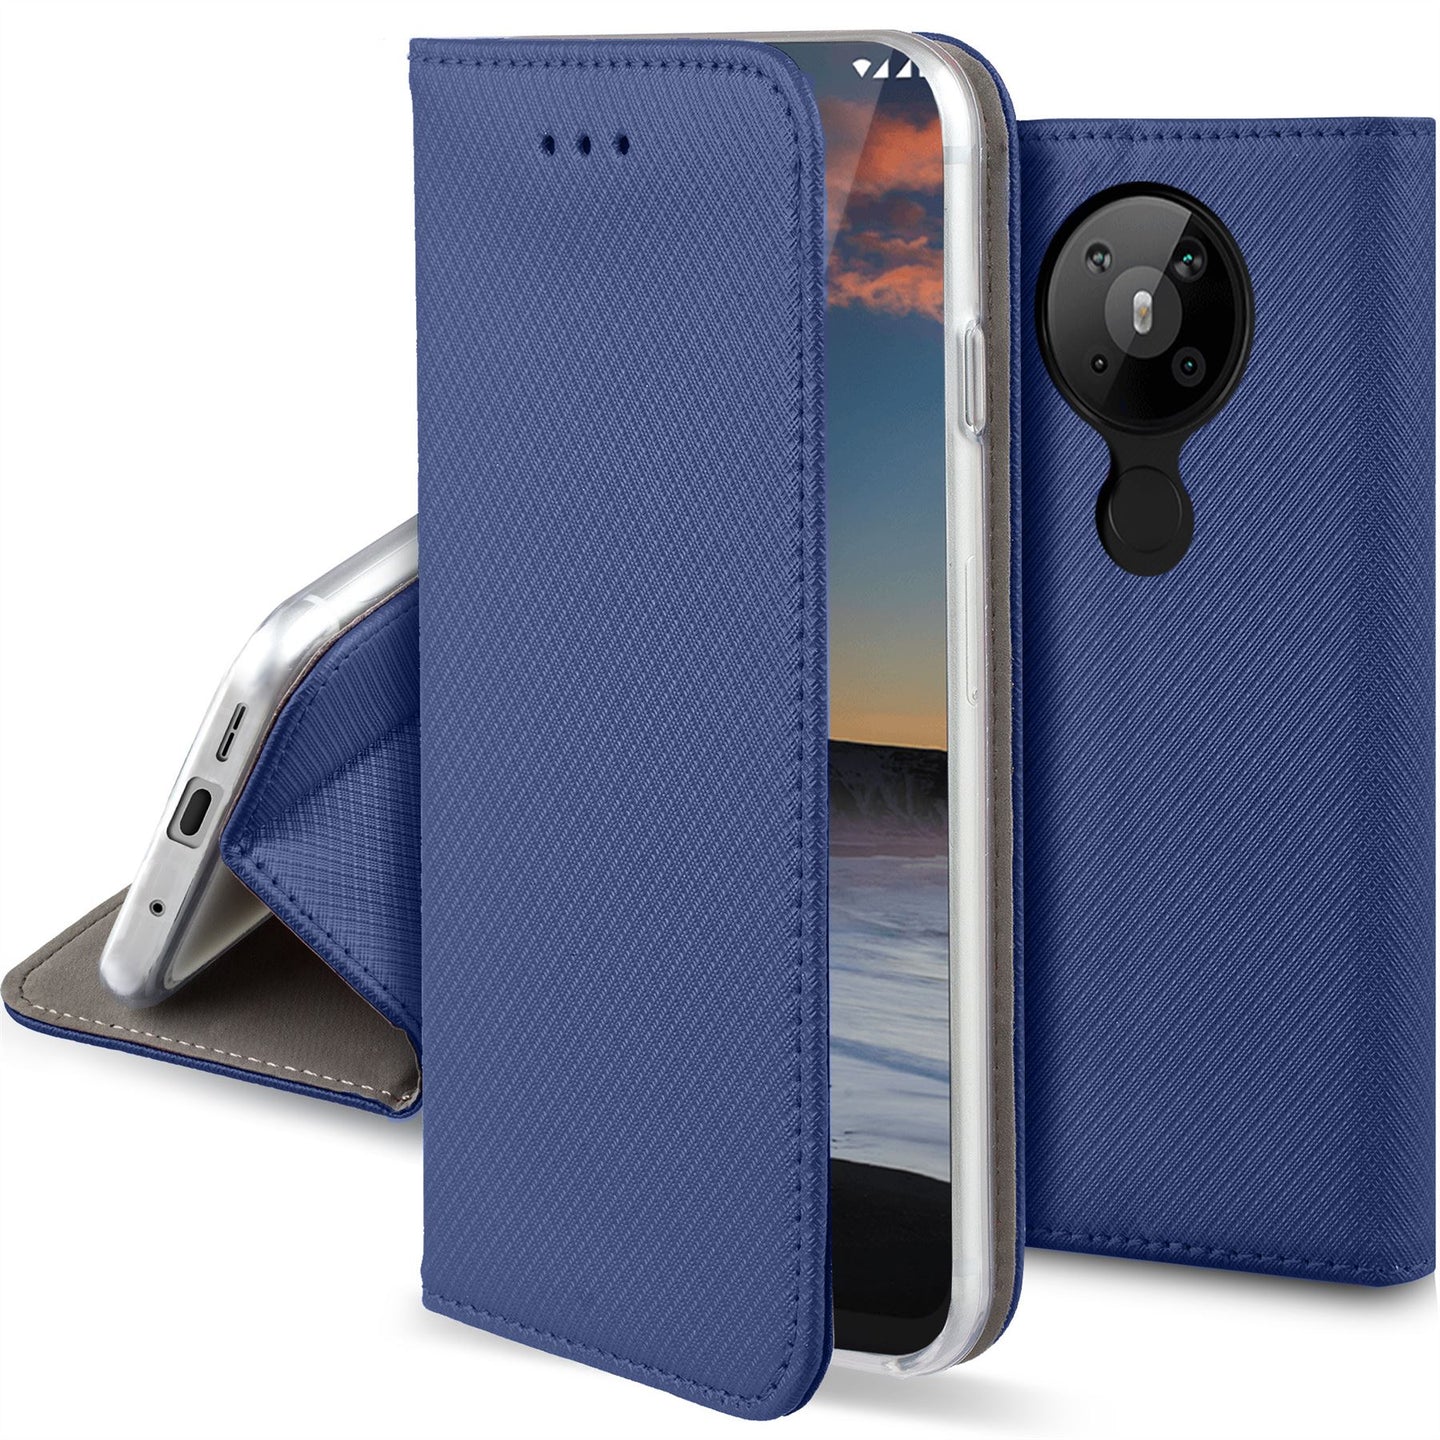 Moozy Case Flip Cover for Nokia 5.3, Dark Blue - Smart Magnetic Flip Case with Card Holder and Stand